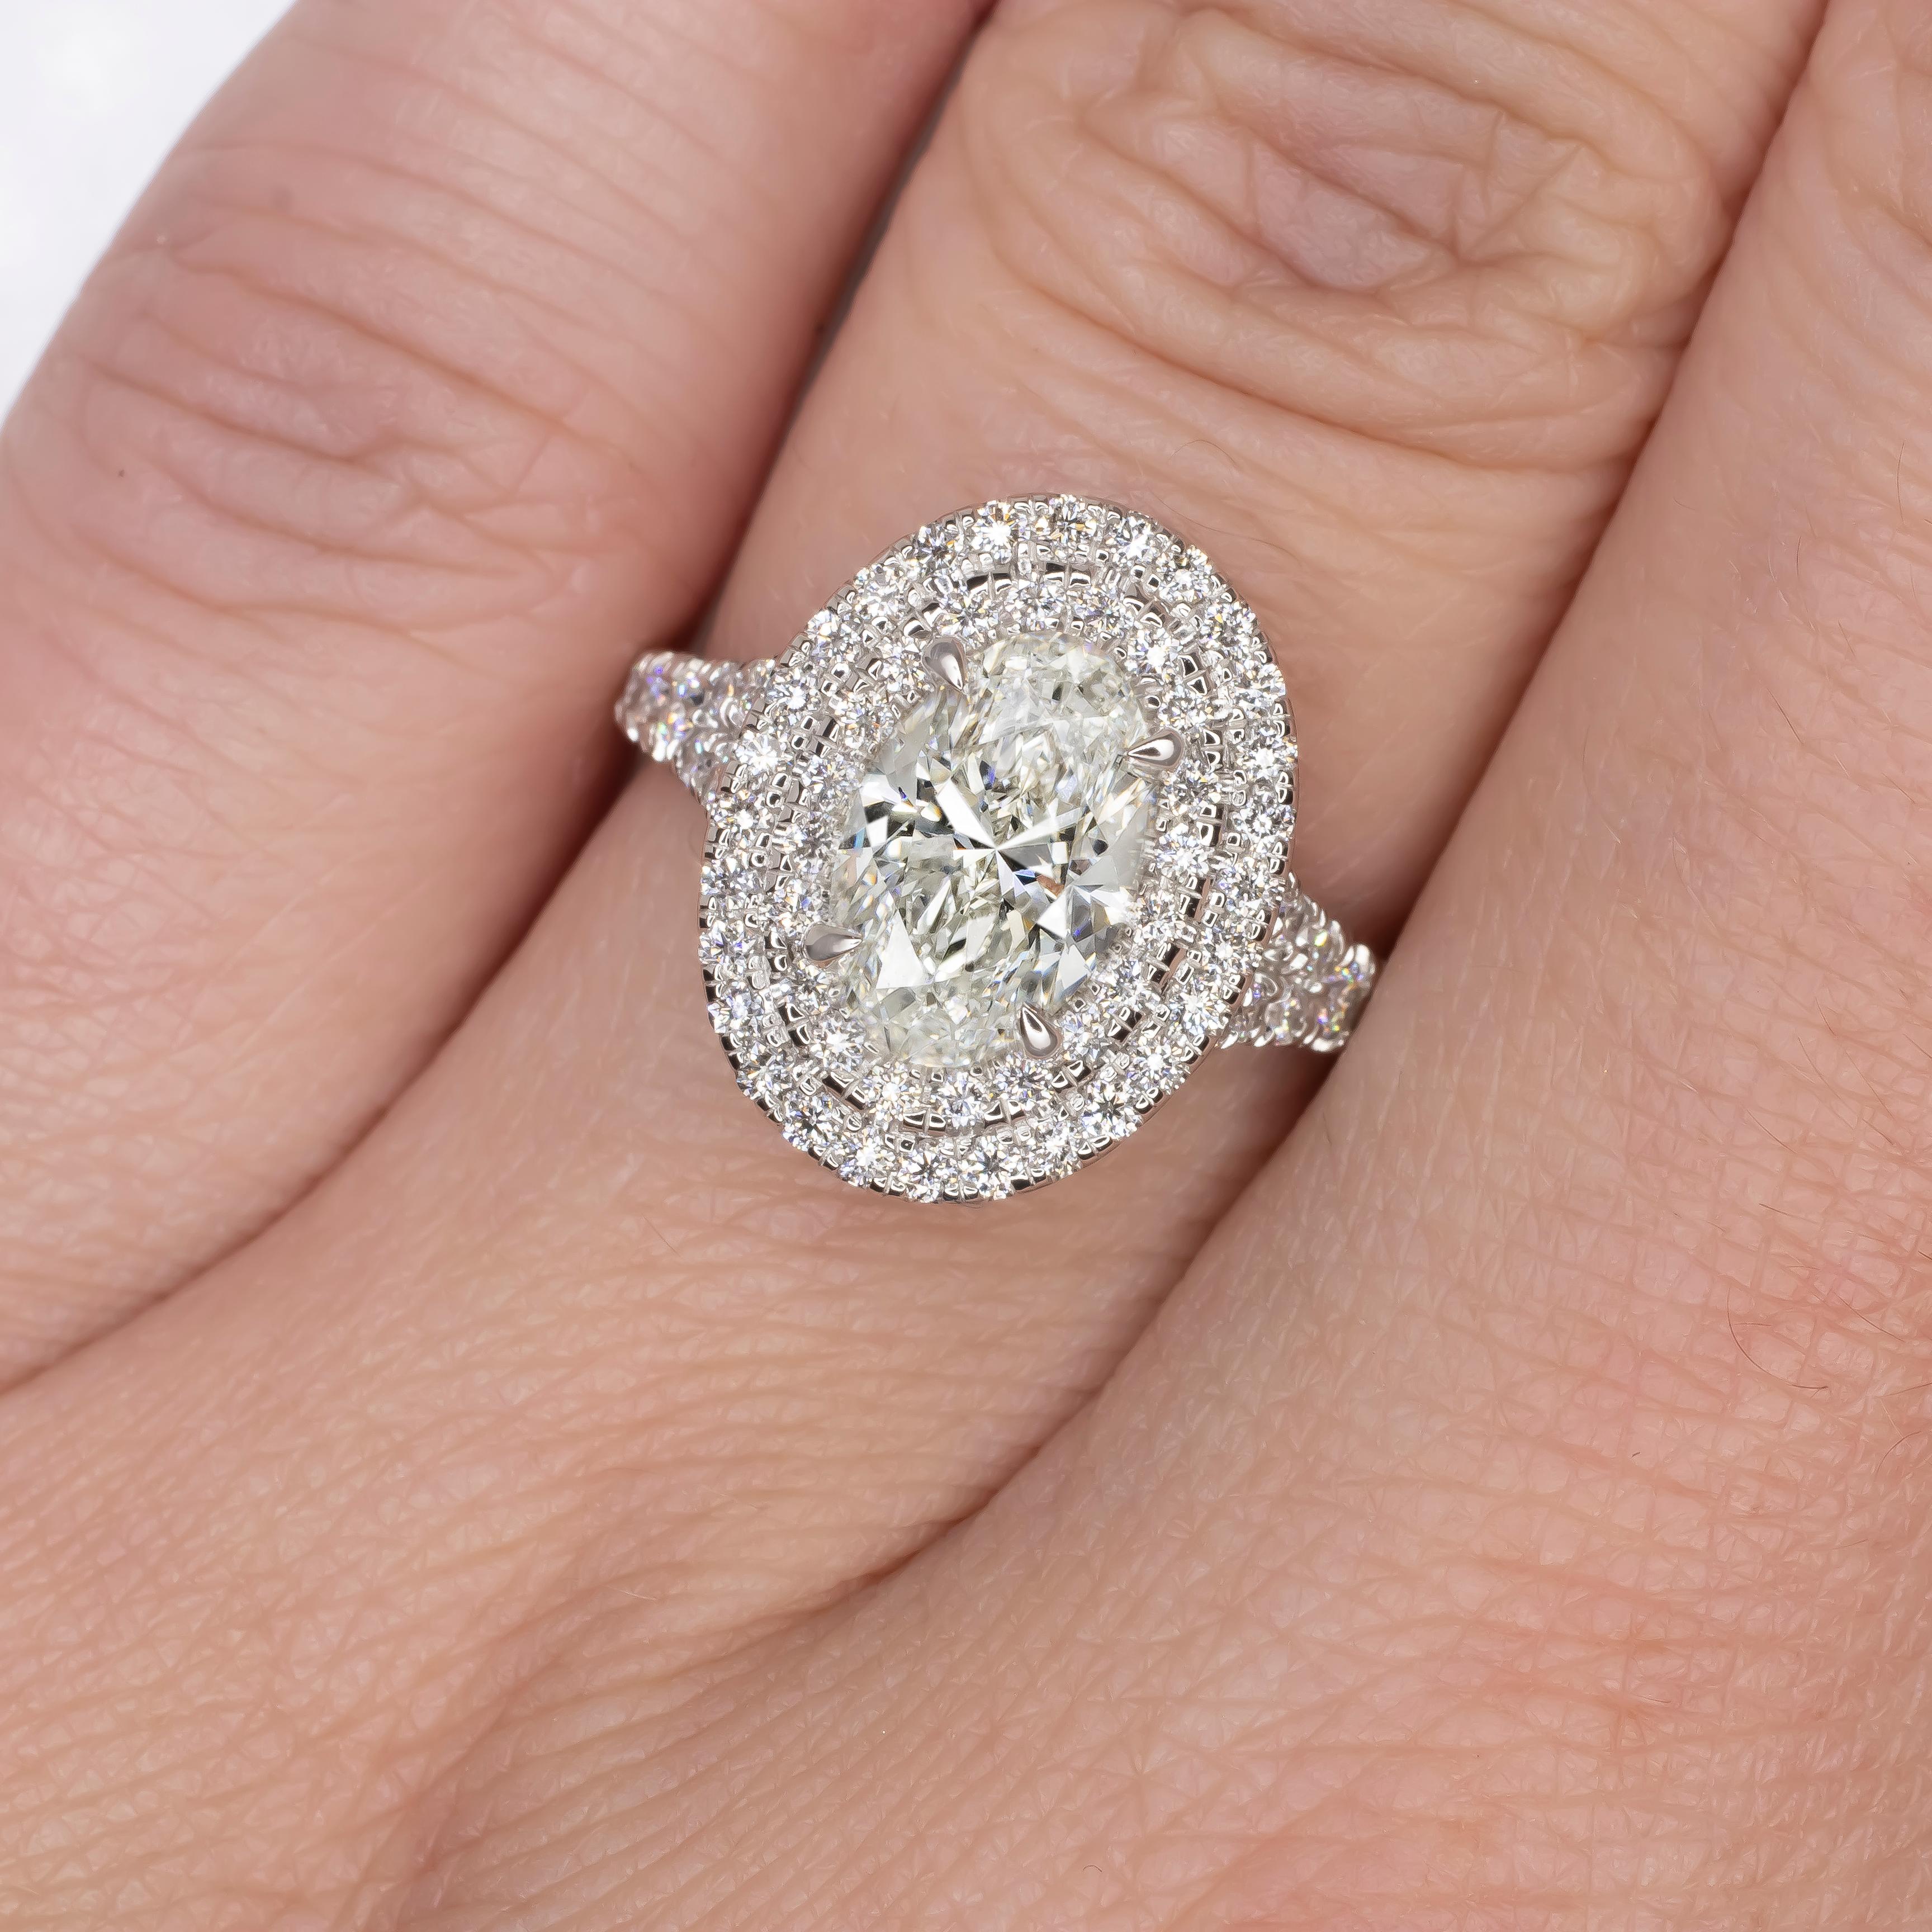 Exquisite in design and radiant in brilliance, this white gold engagement ring showcases a breathtaking 1.50-carat oval brilliant diamond, graded F for color and VS1 for clarity by the prestigious Gemological Institute of America (GIA). 

The